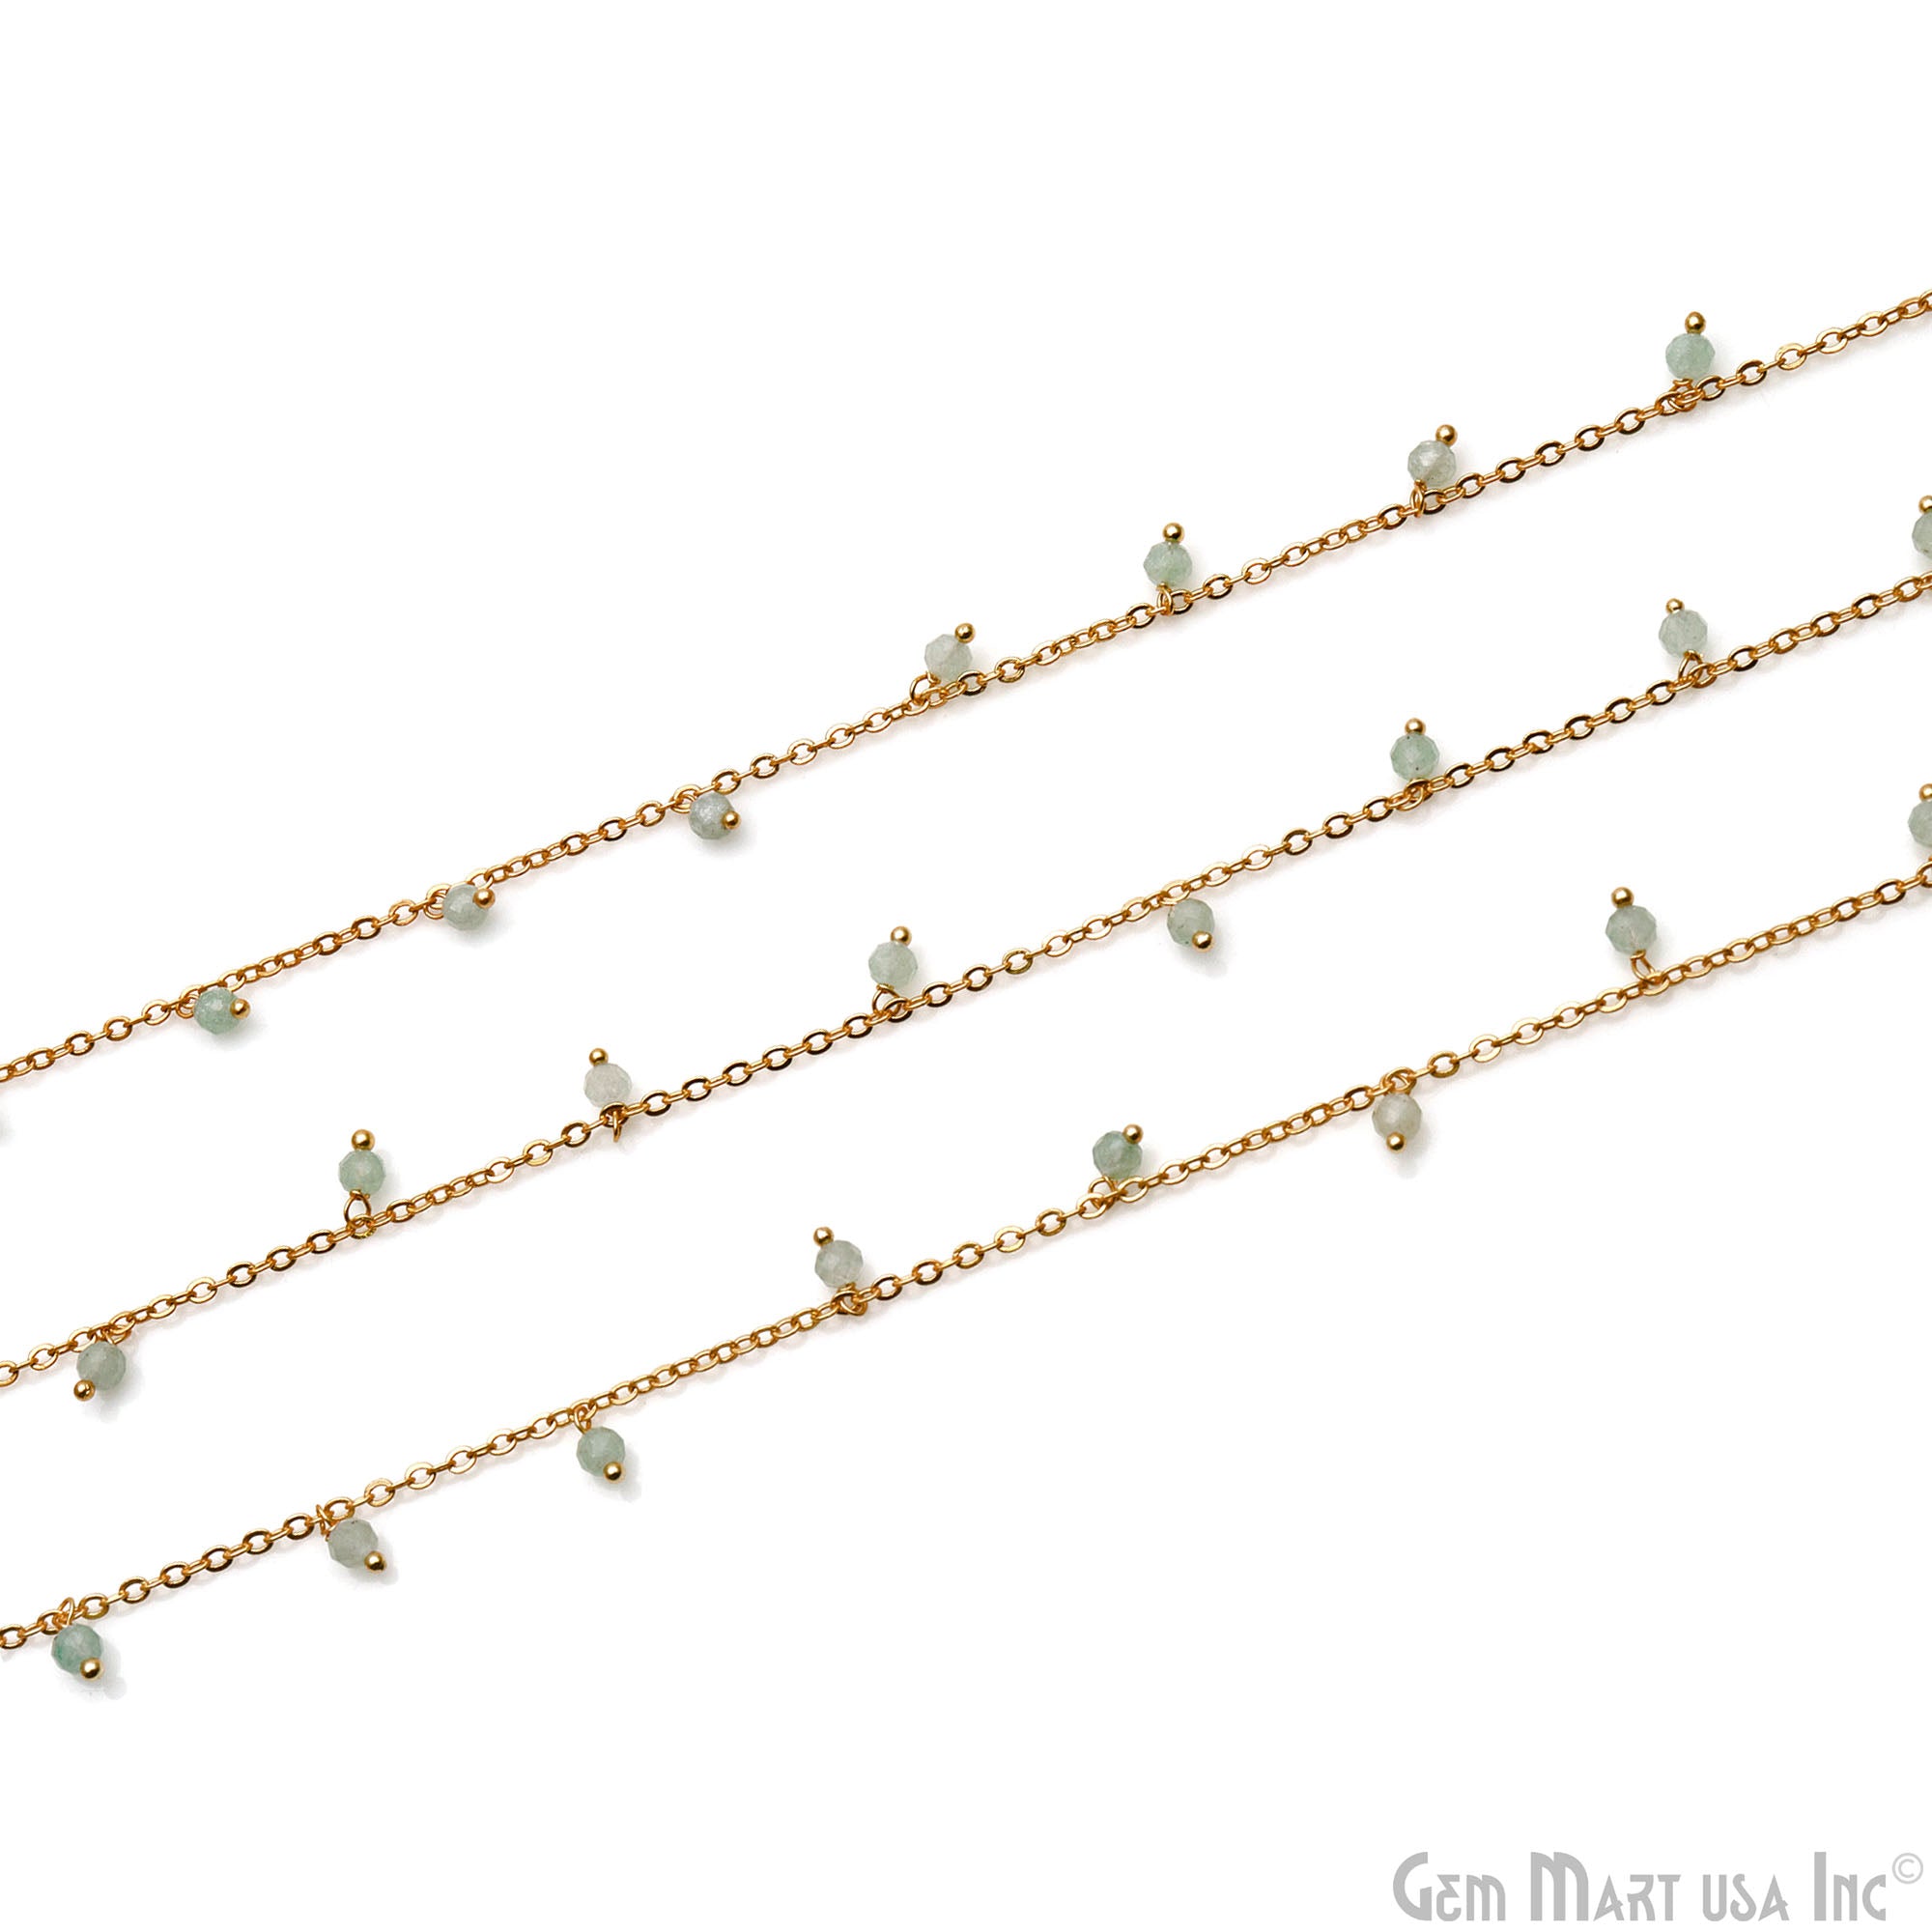 Prehnite Faceted Beads 3-4mm Gold Plated Cluster Dangle Chain